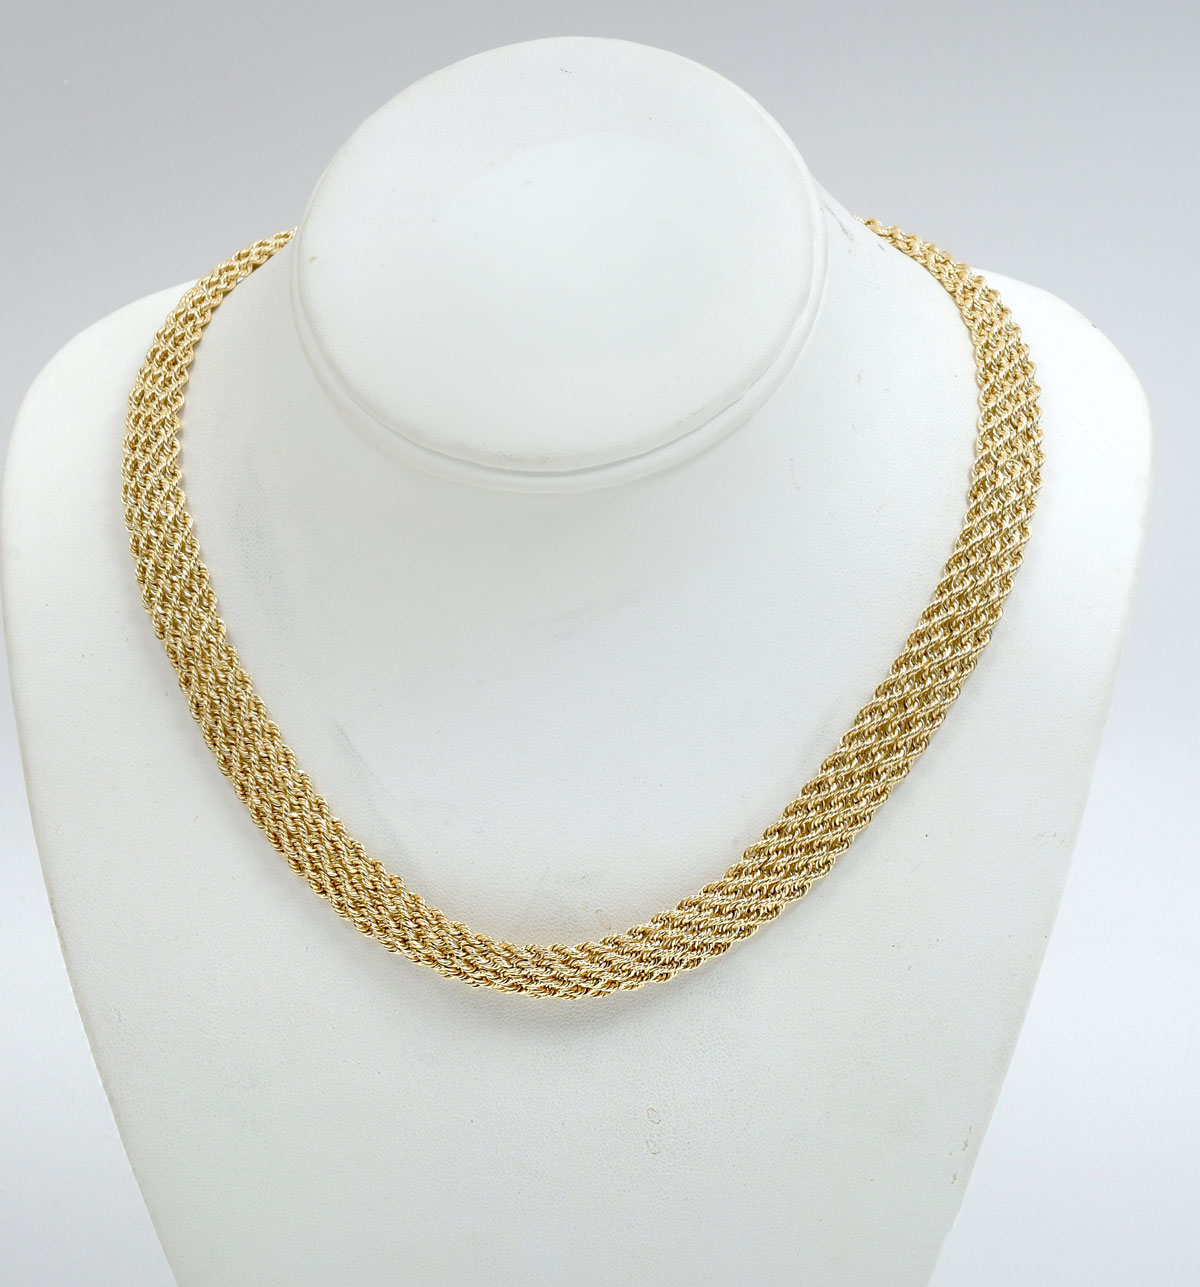 14K HOLLOW ROPE NECKLACE: 14K yellow